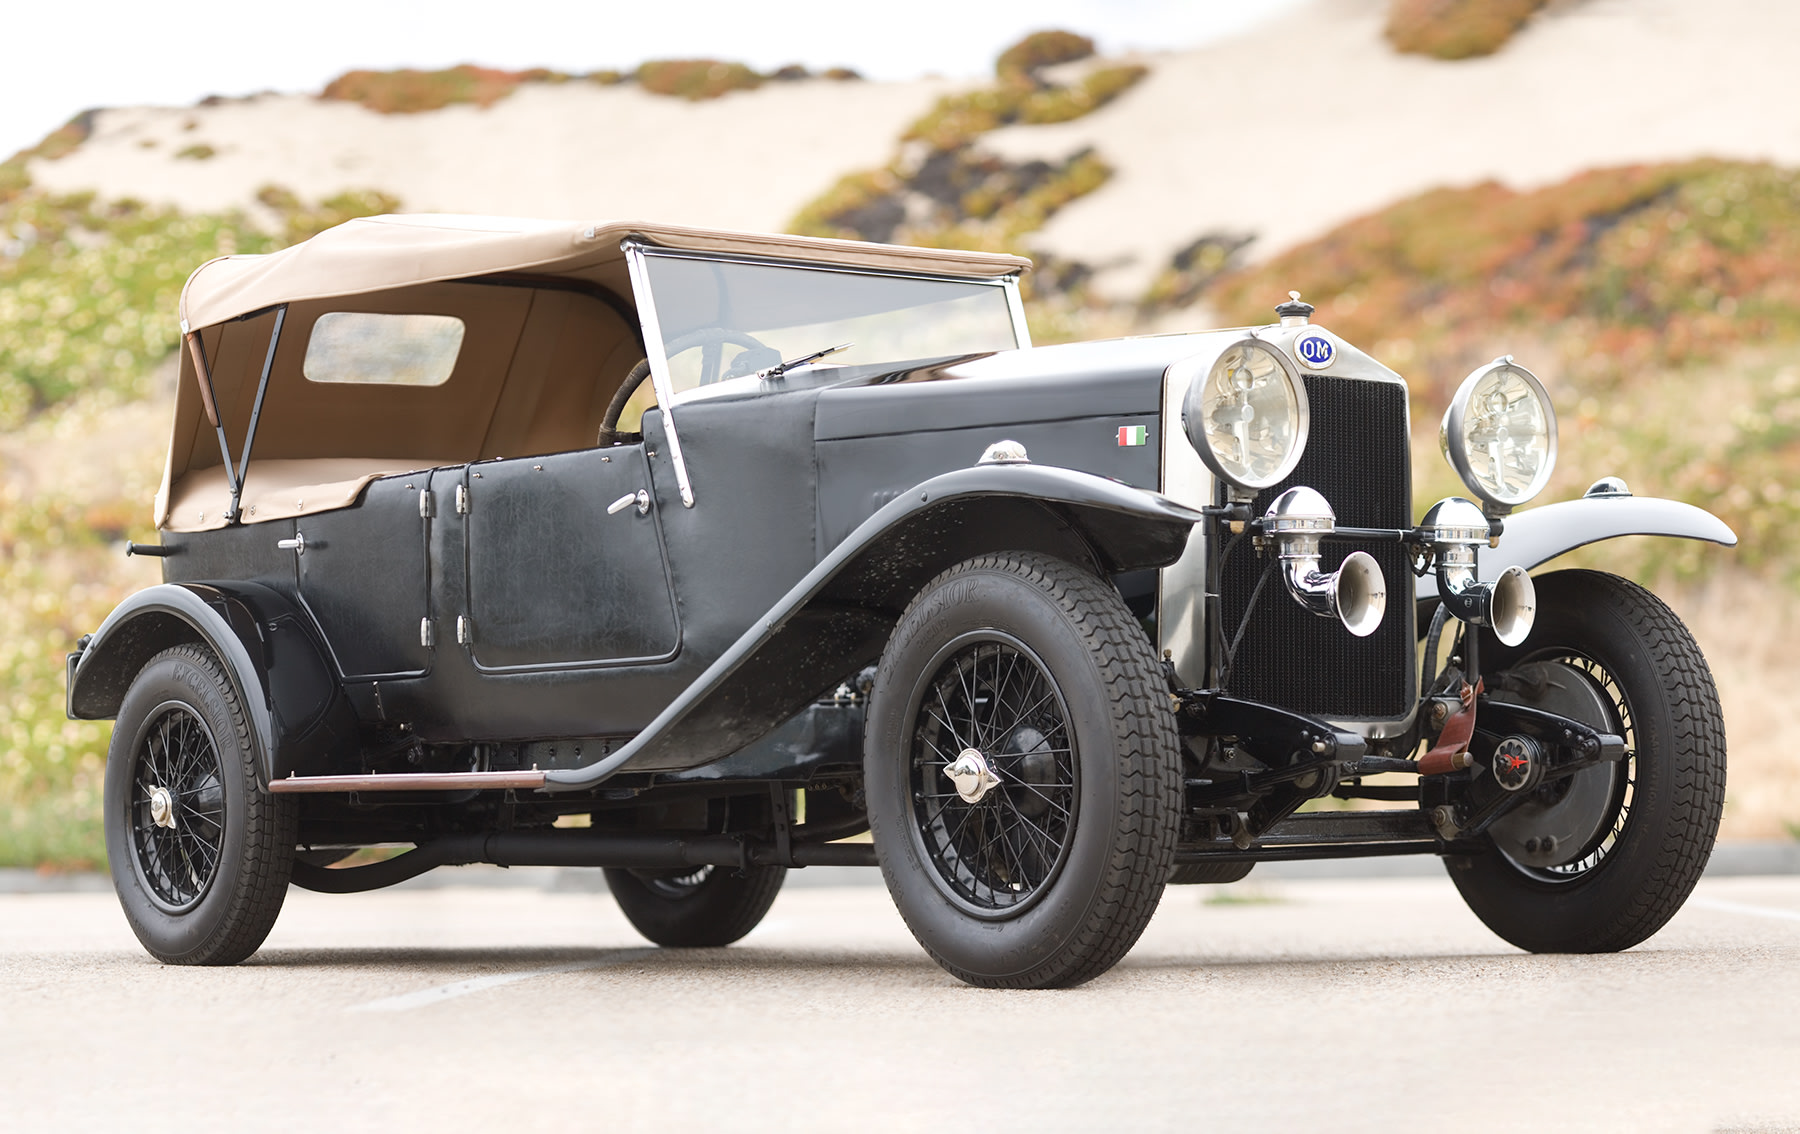 1928 OM Tipo 665 Supercharged Tourer-2